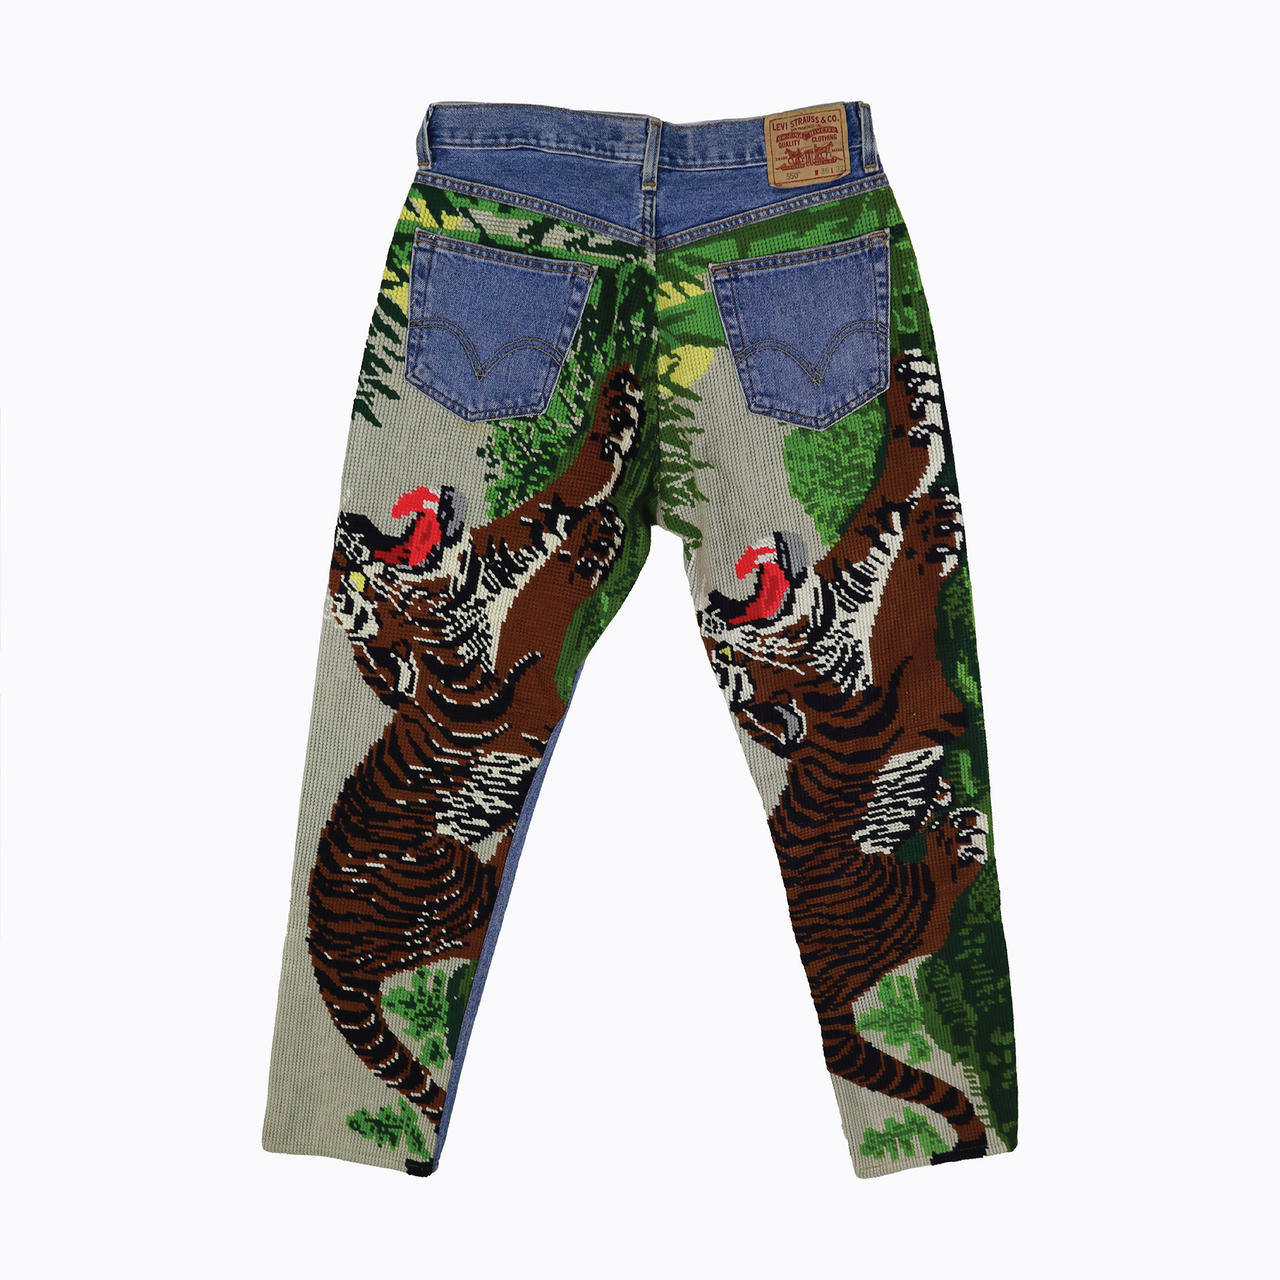 Tiger 3 Embroidery Jeans